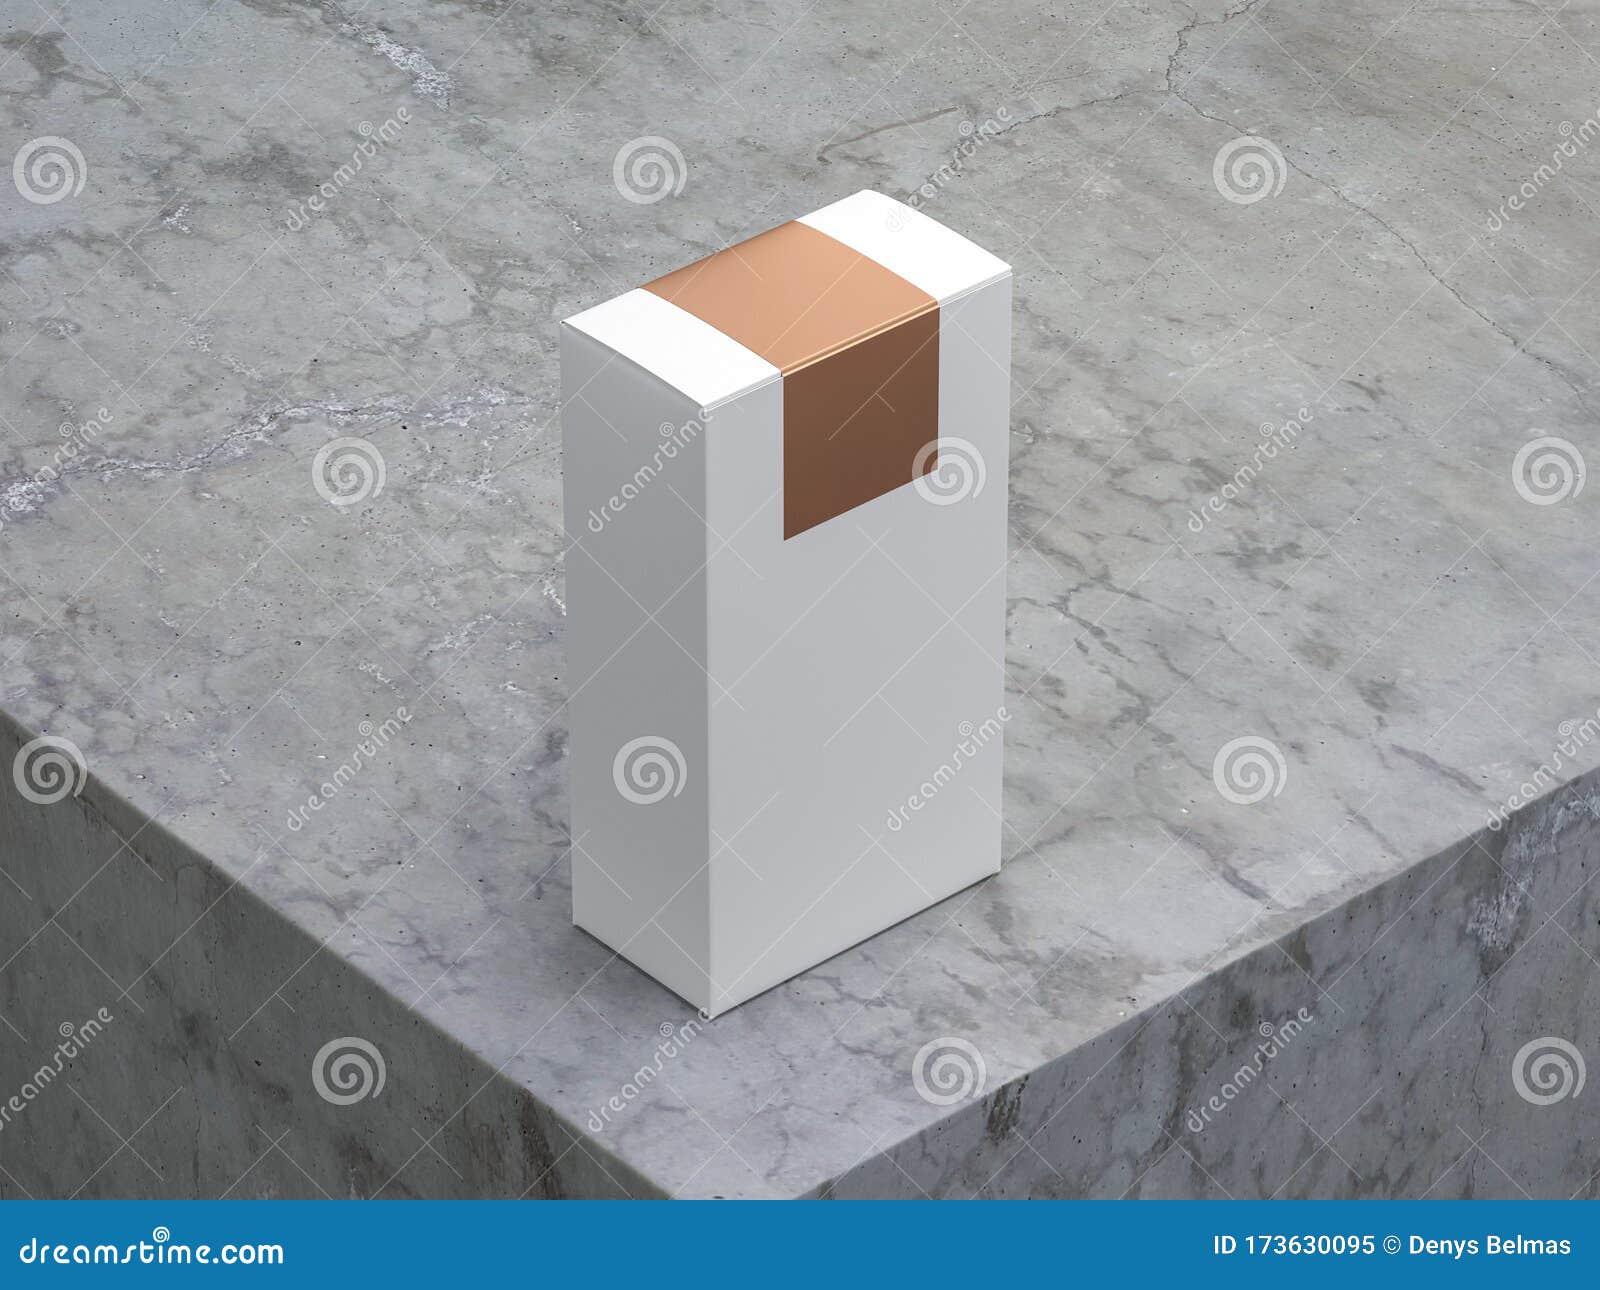 Download White Cardboard Box Mockup With Gold Sticker On Top Side ...